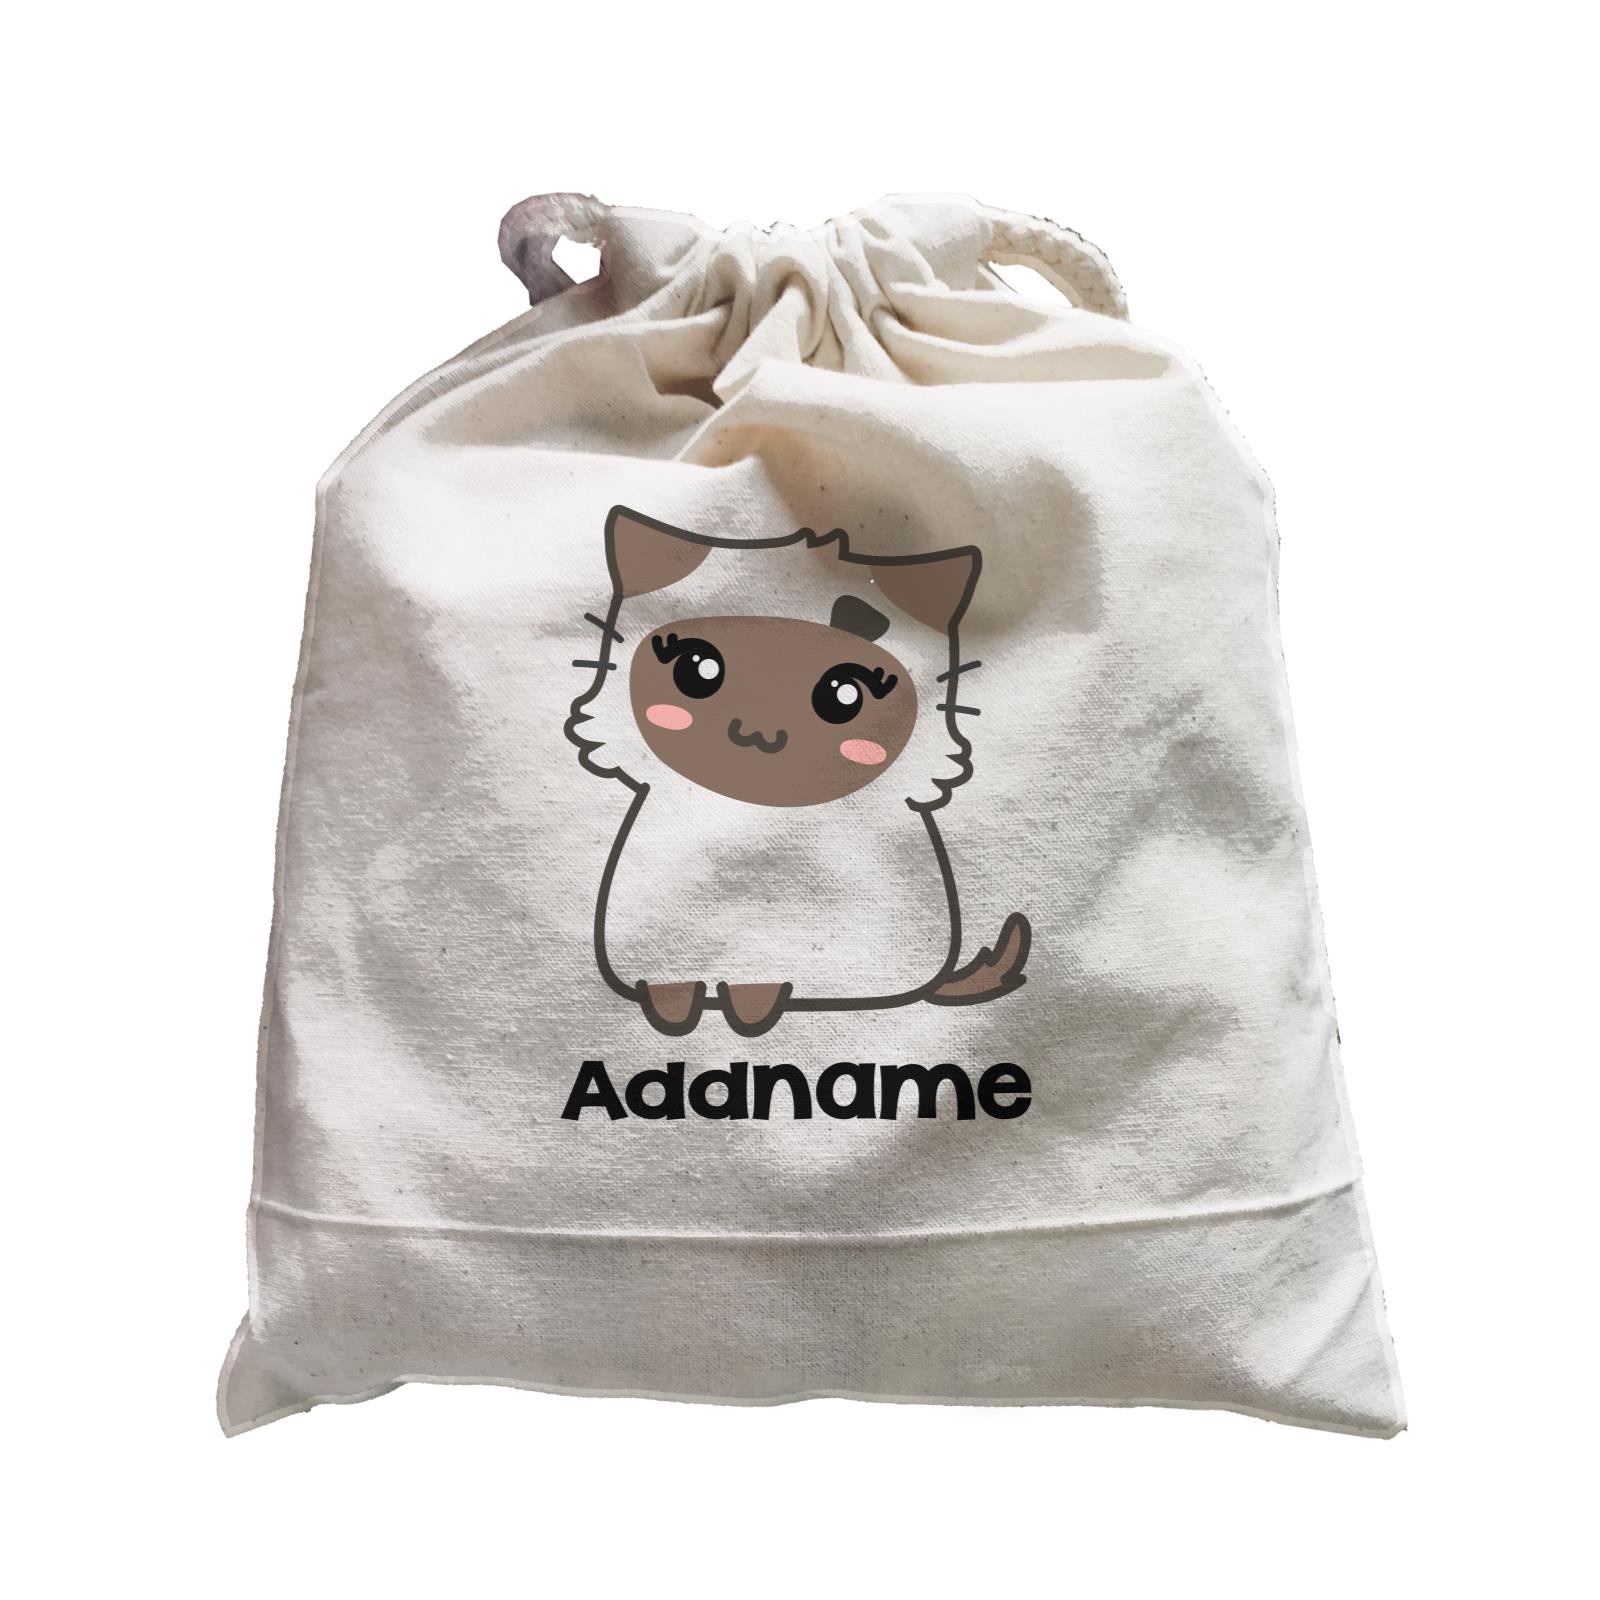 Drawn Adorable Cats White & Chocolate Addname Satchel